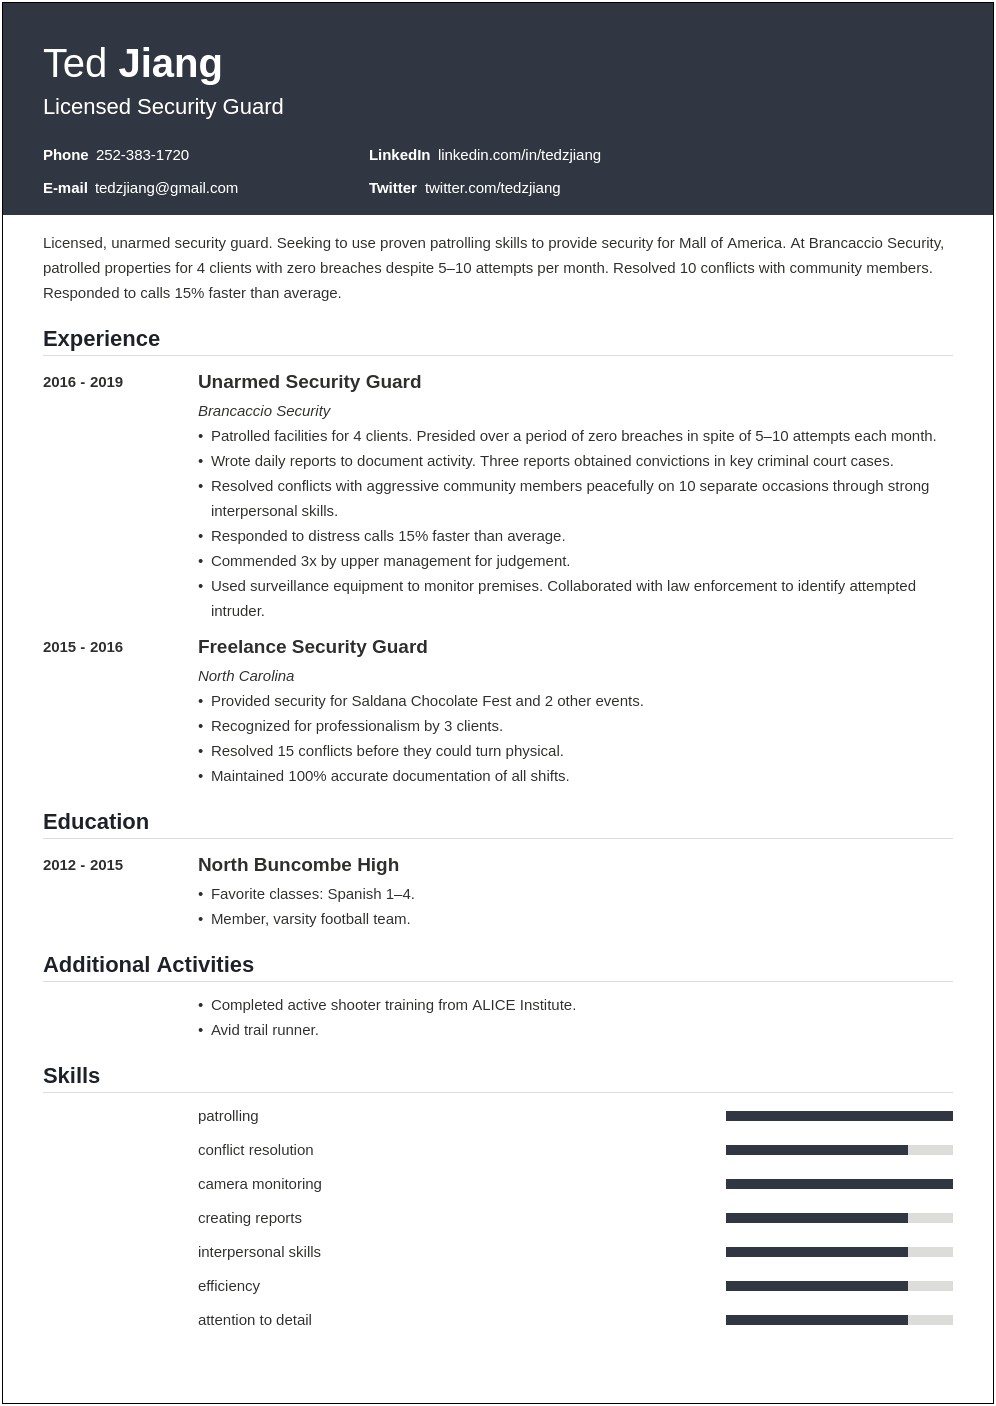 Show Me Completed Resume Example For Security Officer